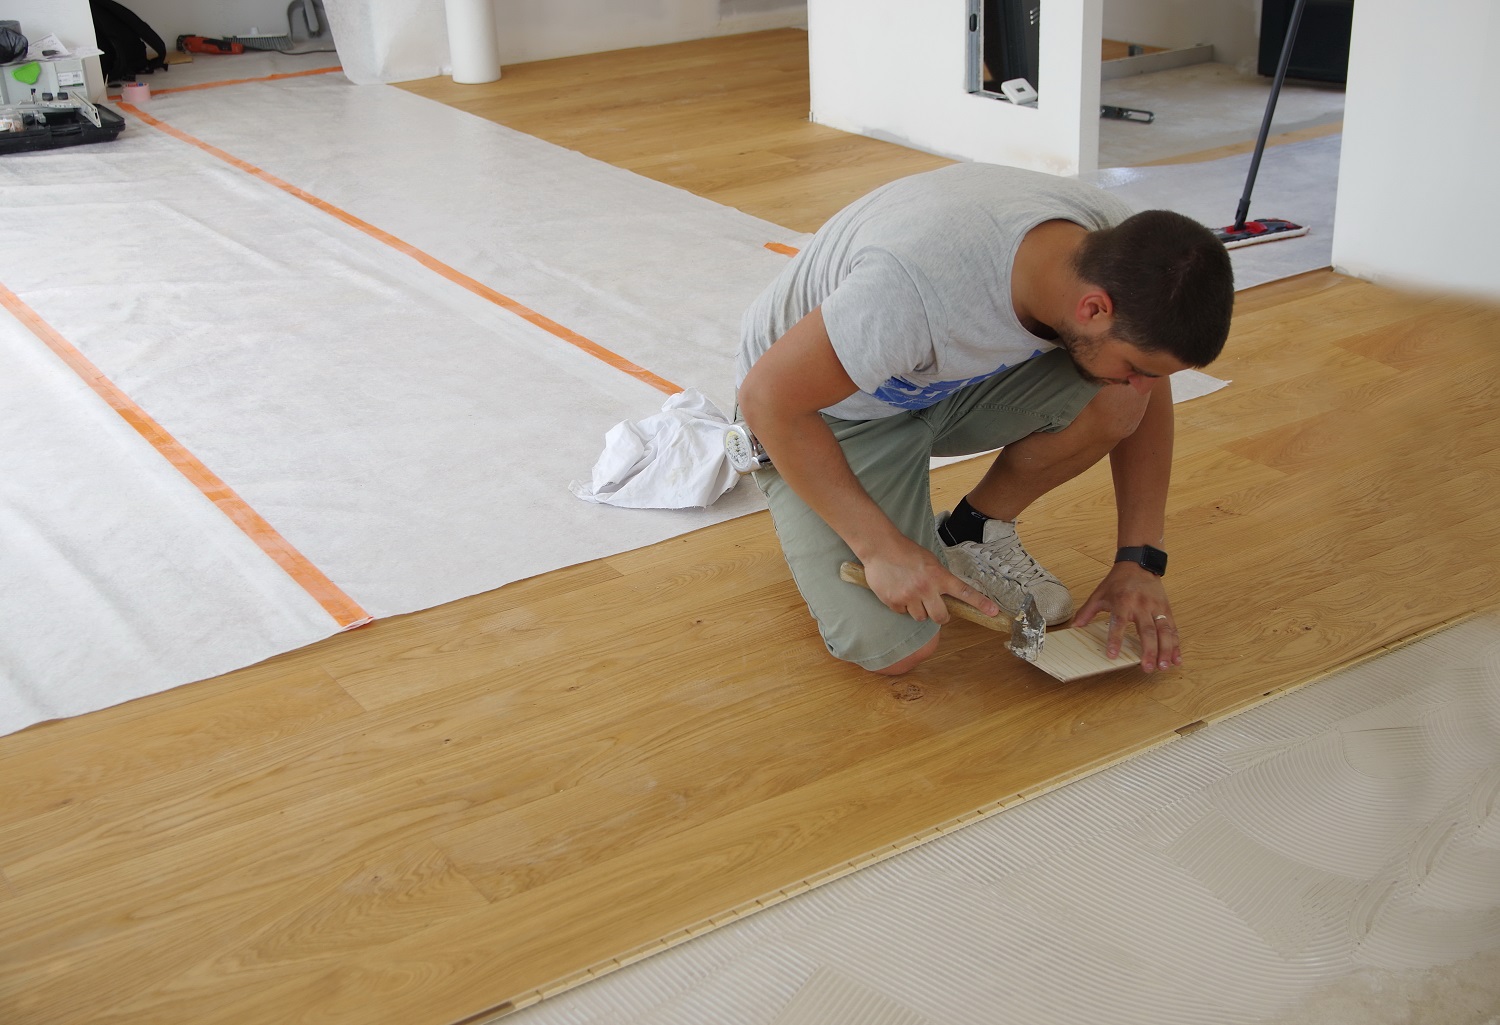 We recommend using a professional flooring installer where possible